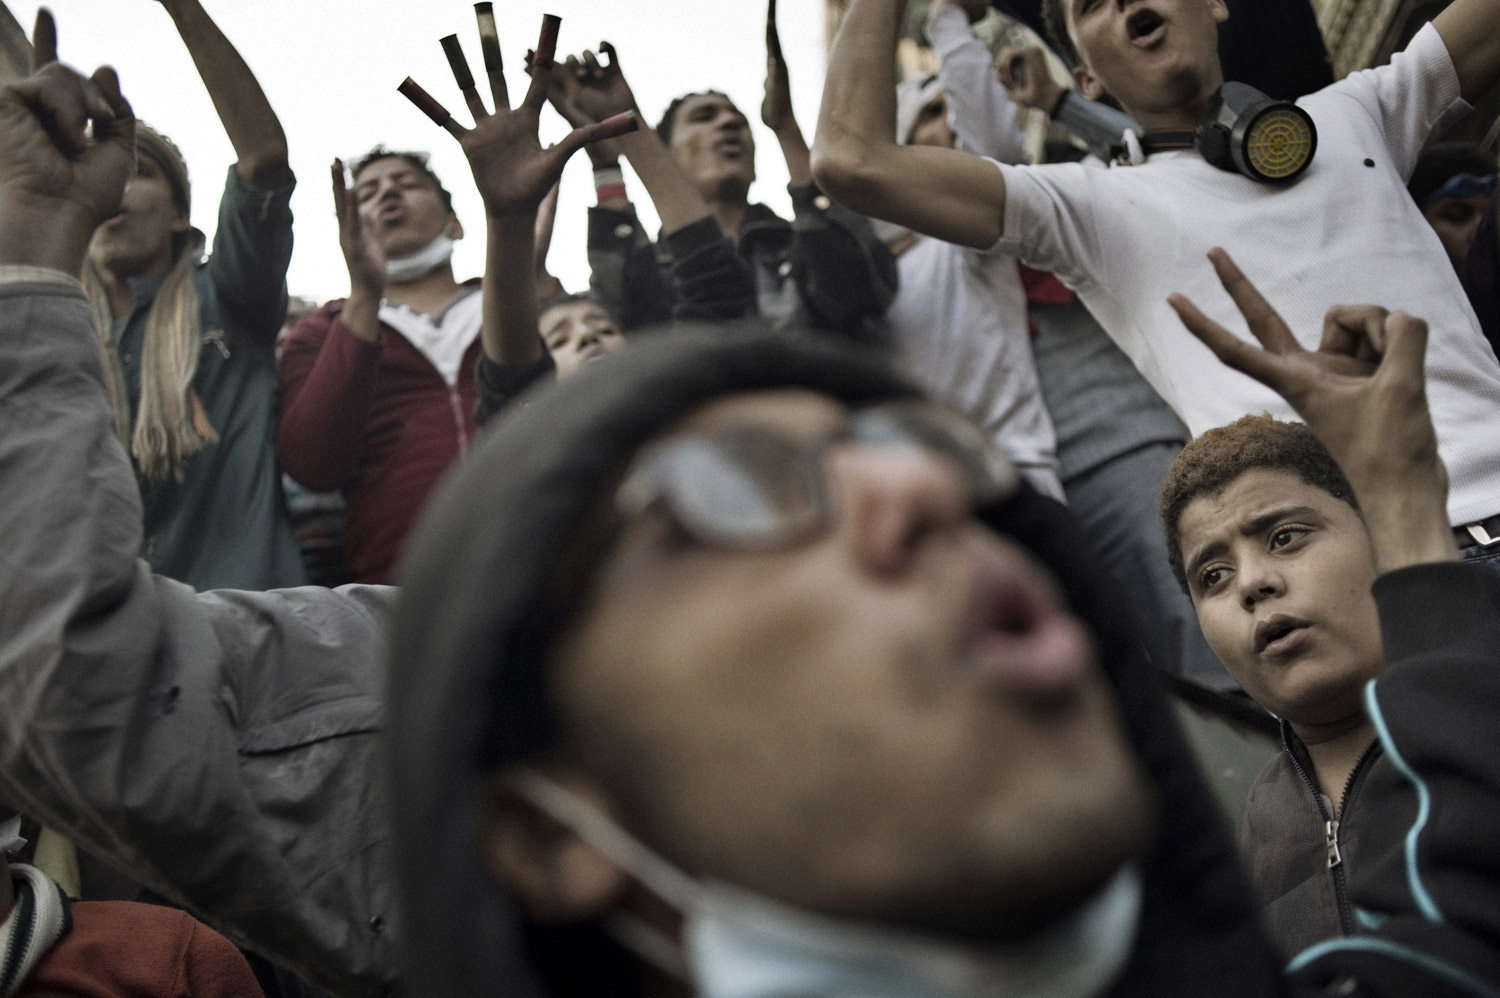 Protesters chant anti-military council slogans at a barricade during a temporary cease-fire with Egyptian security forces, November 23, 2011.